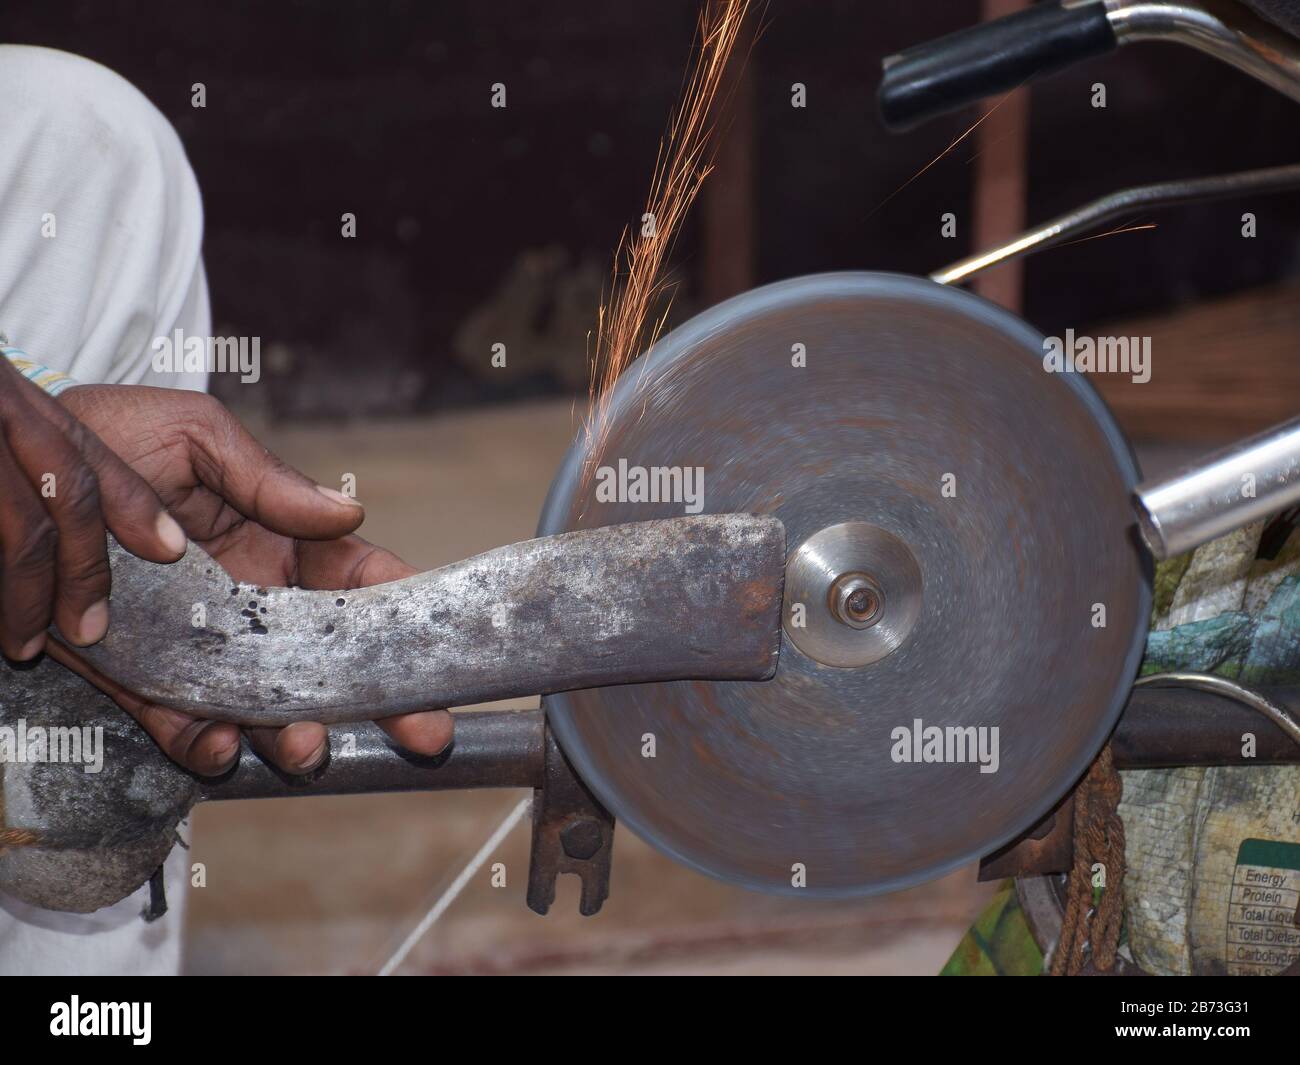 https://c8.alamy.com/comp/2B73G31/a-big-knife-like-object-also-called-bothi-or-dao-is-sharpened-by-an-indian-man-in-his-bicycle-powered-stone-wheel-2B73G31.jpg